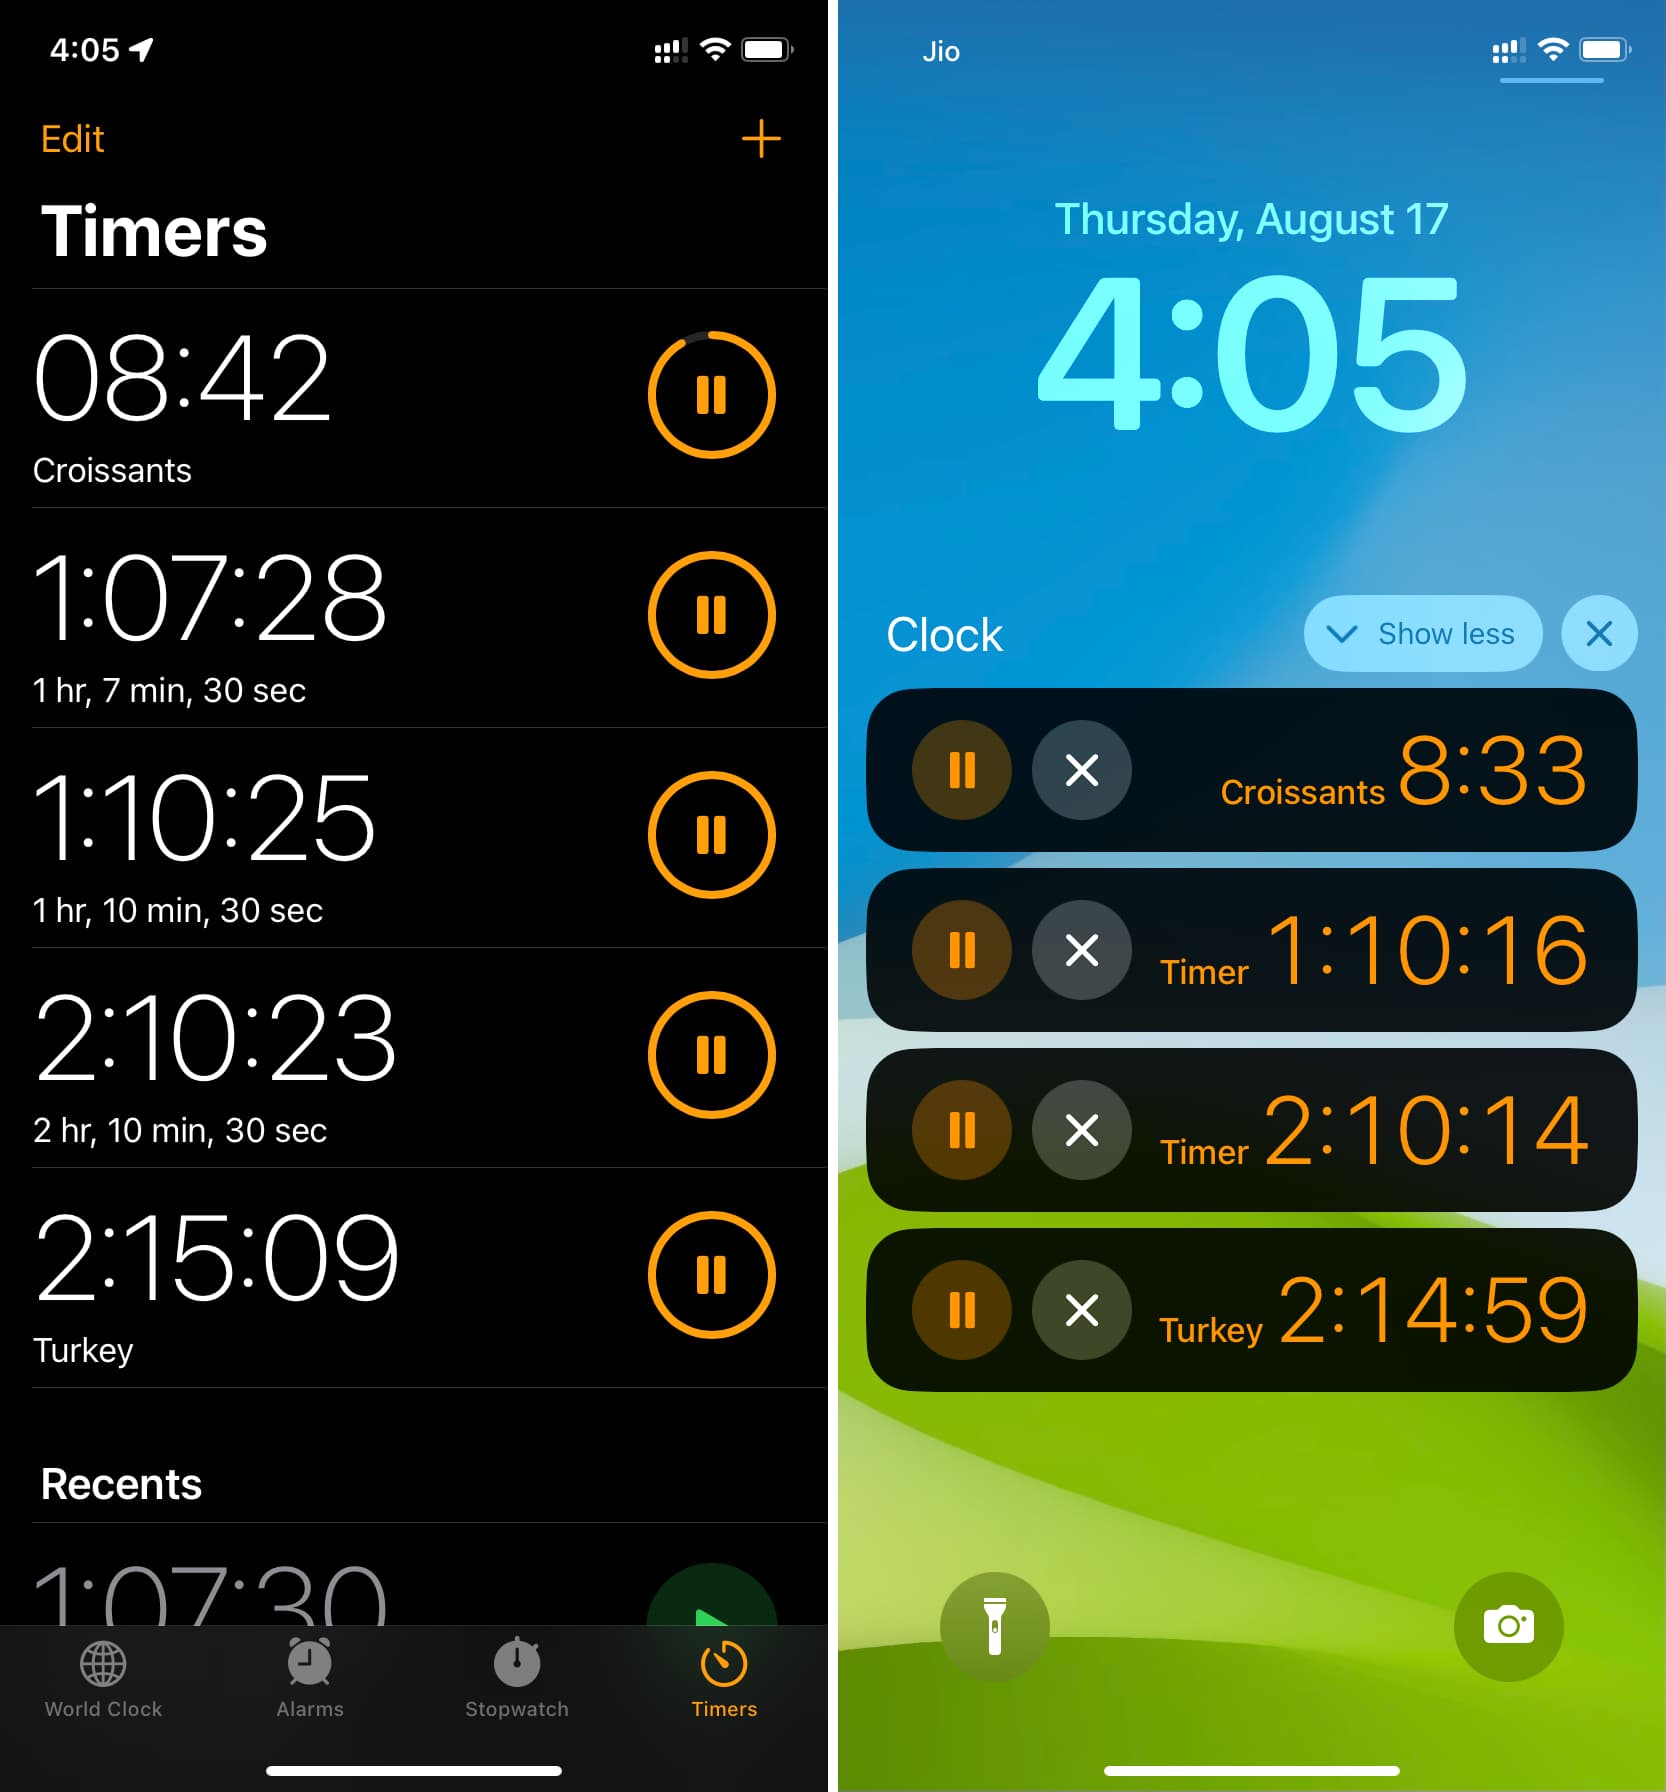 See all your running timers inside iPhone Clock app and as Live Activities